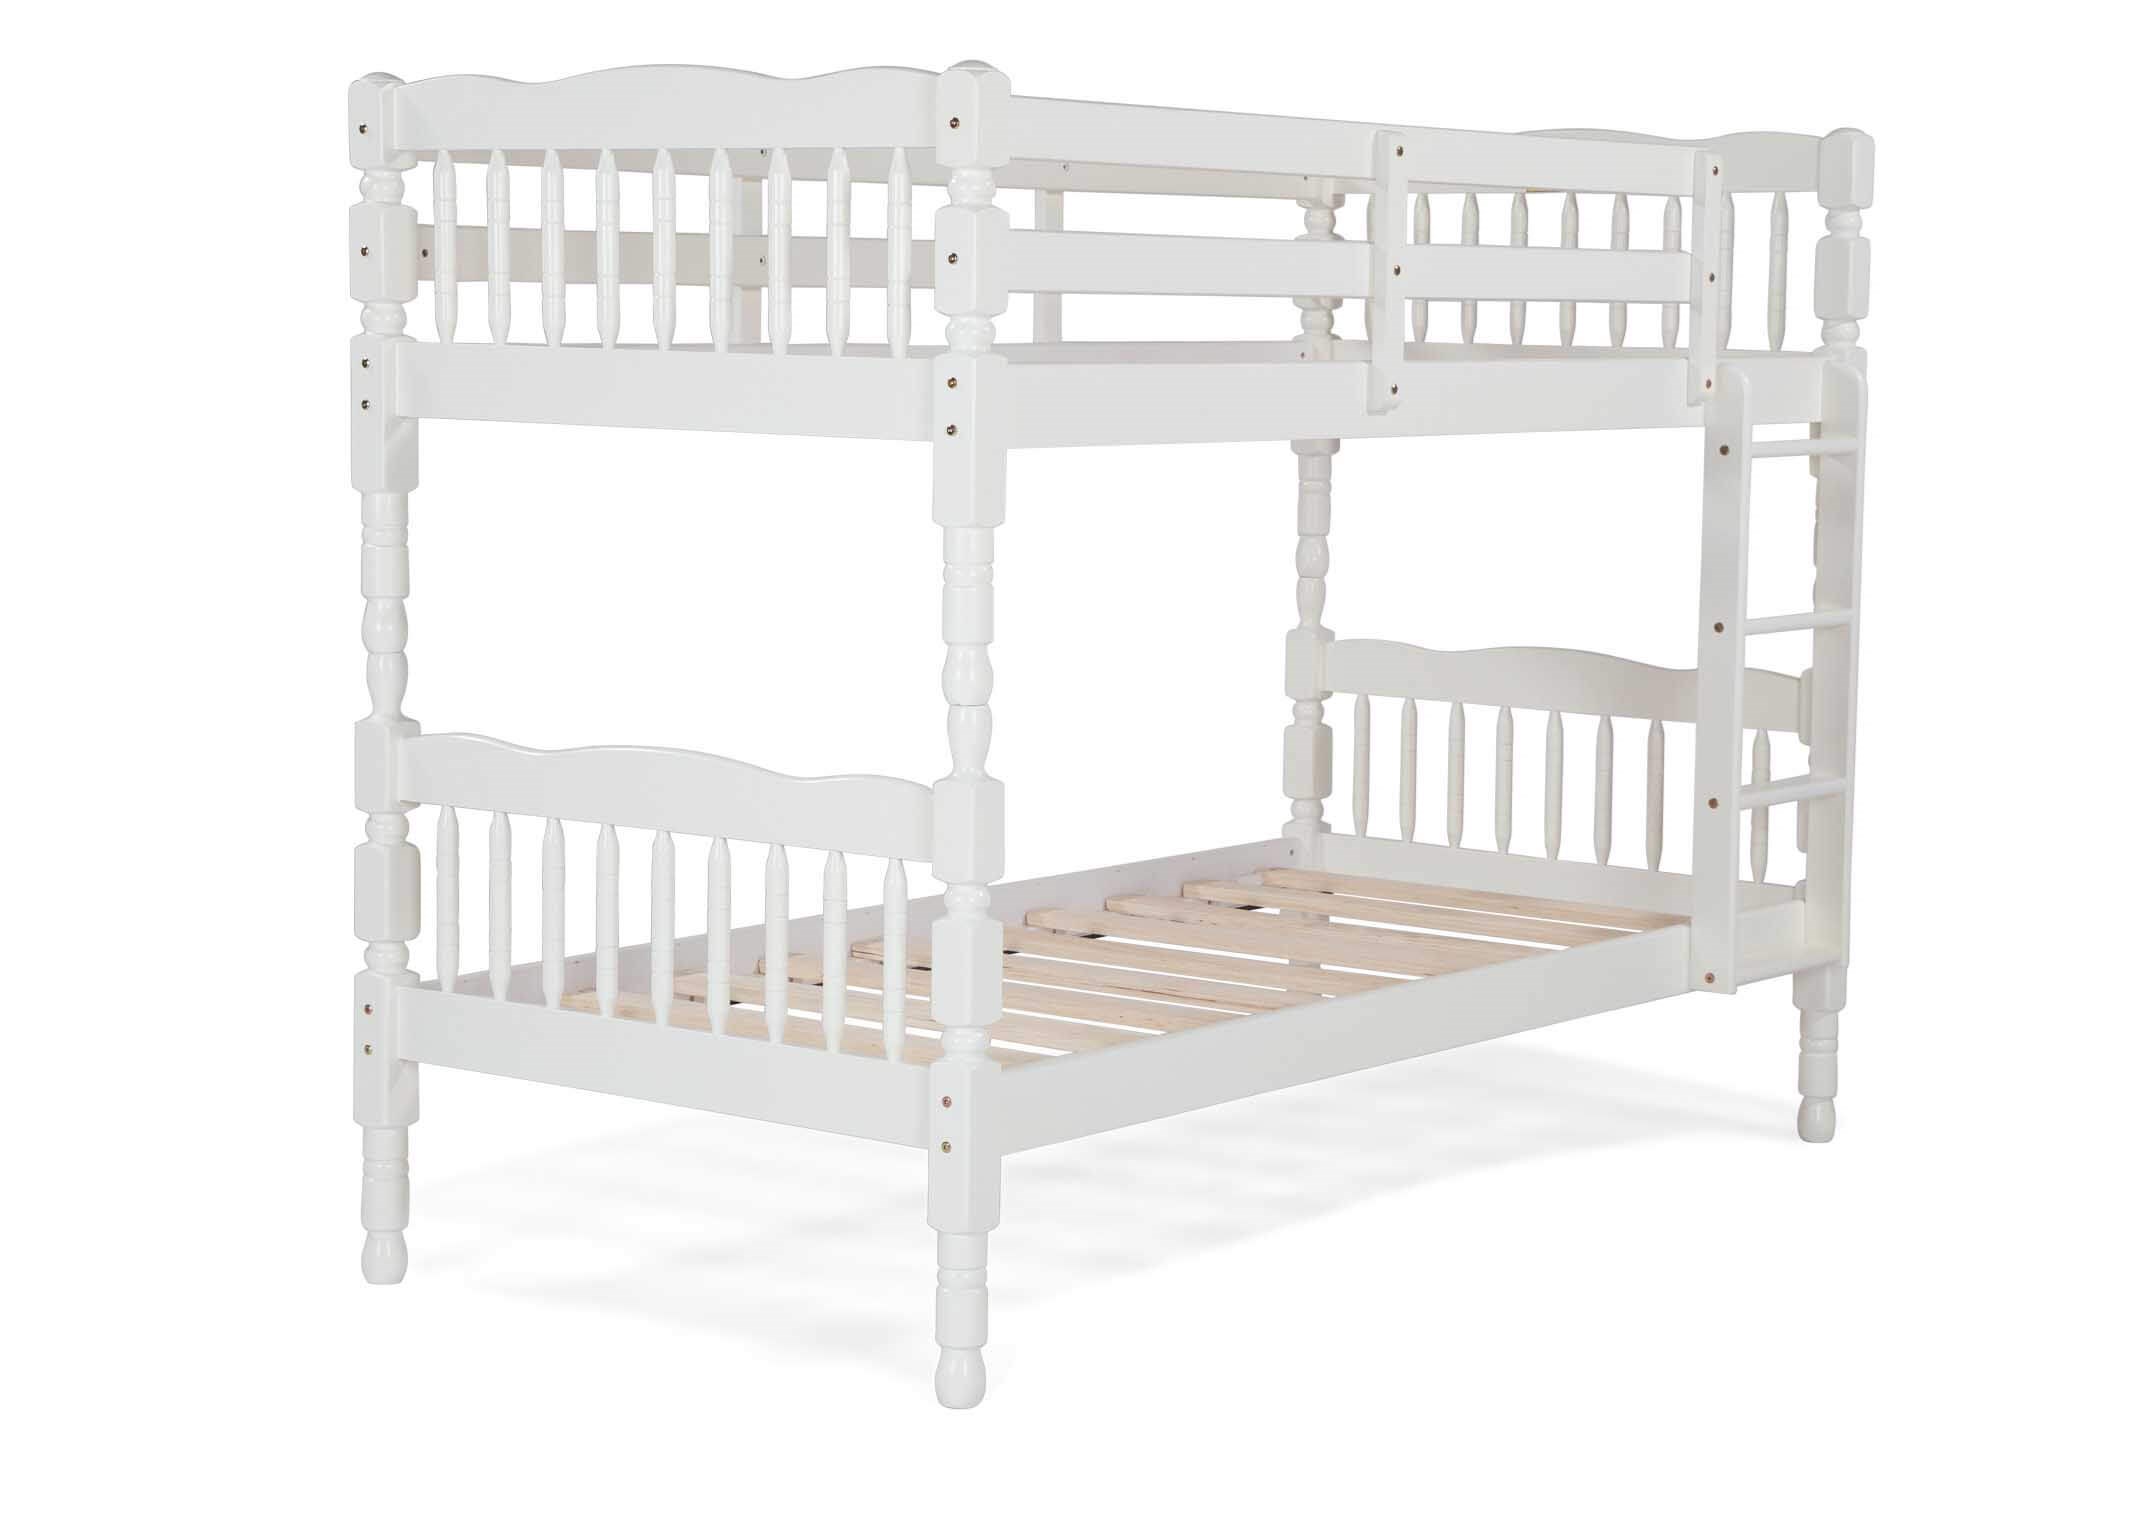 3 Ft White Painted Bunk Bed Austin, Bunk Beds That Can Be Single Beds